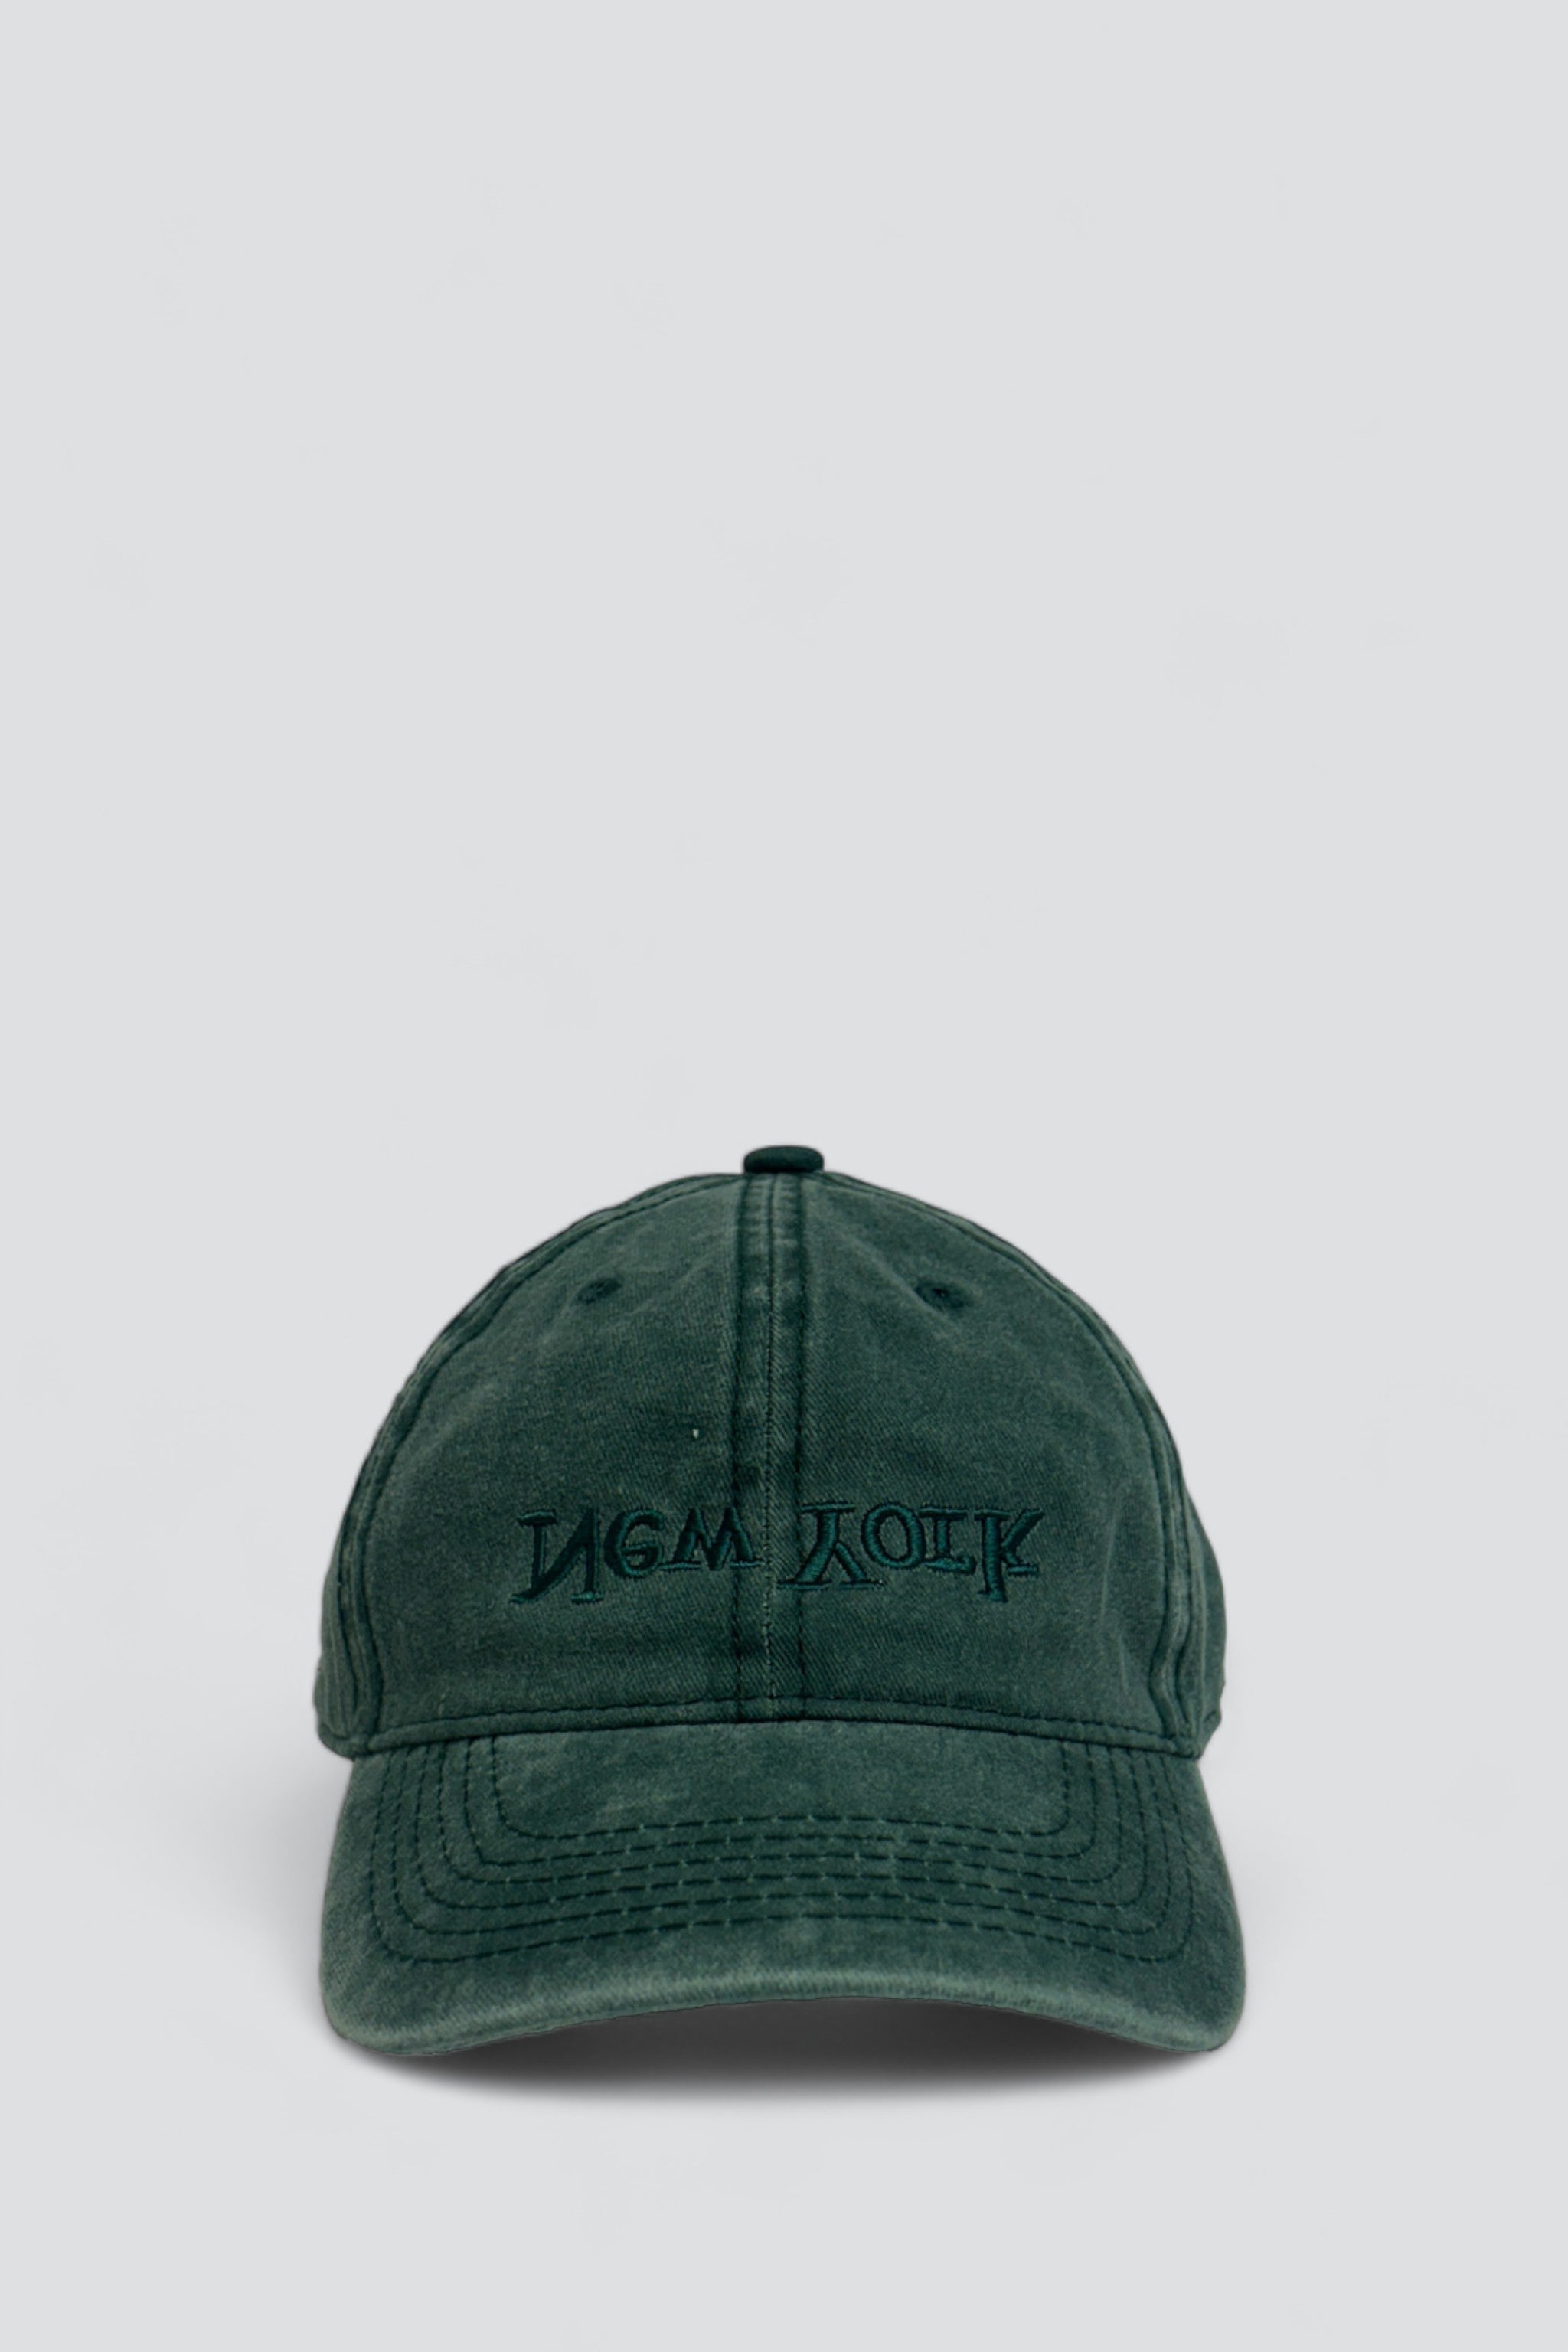 New York Embroidered Hat - Washed Green